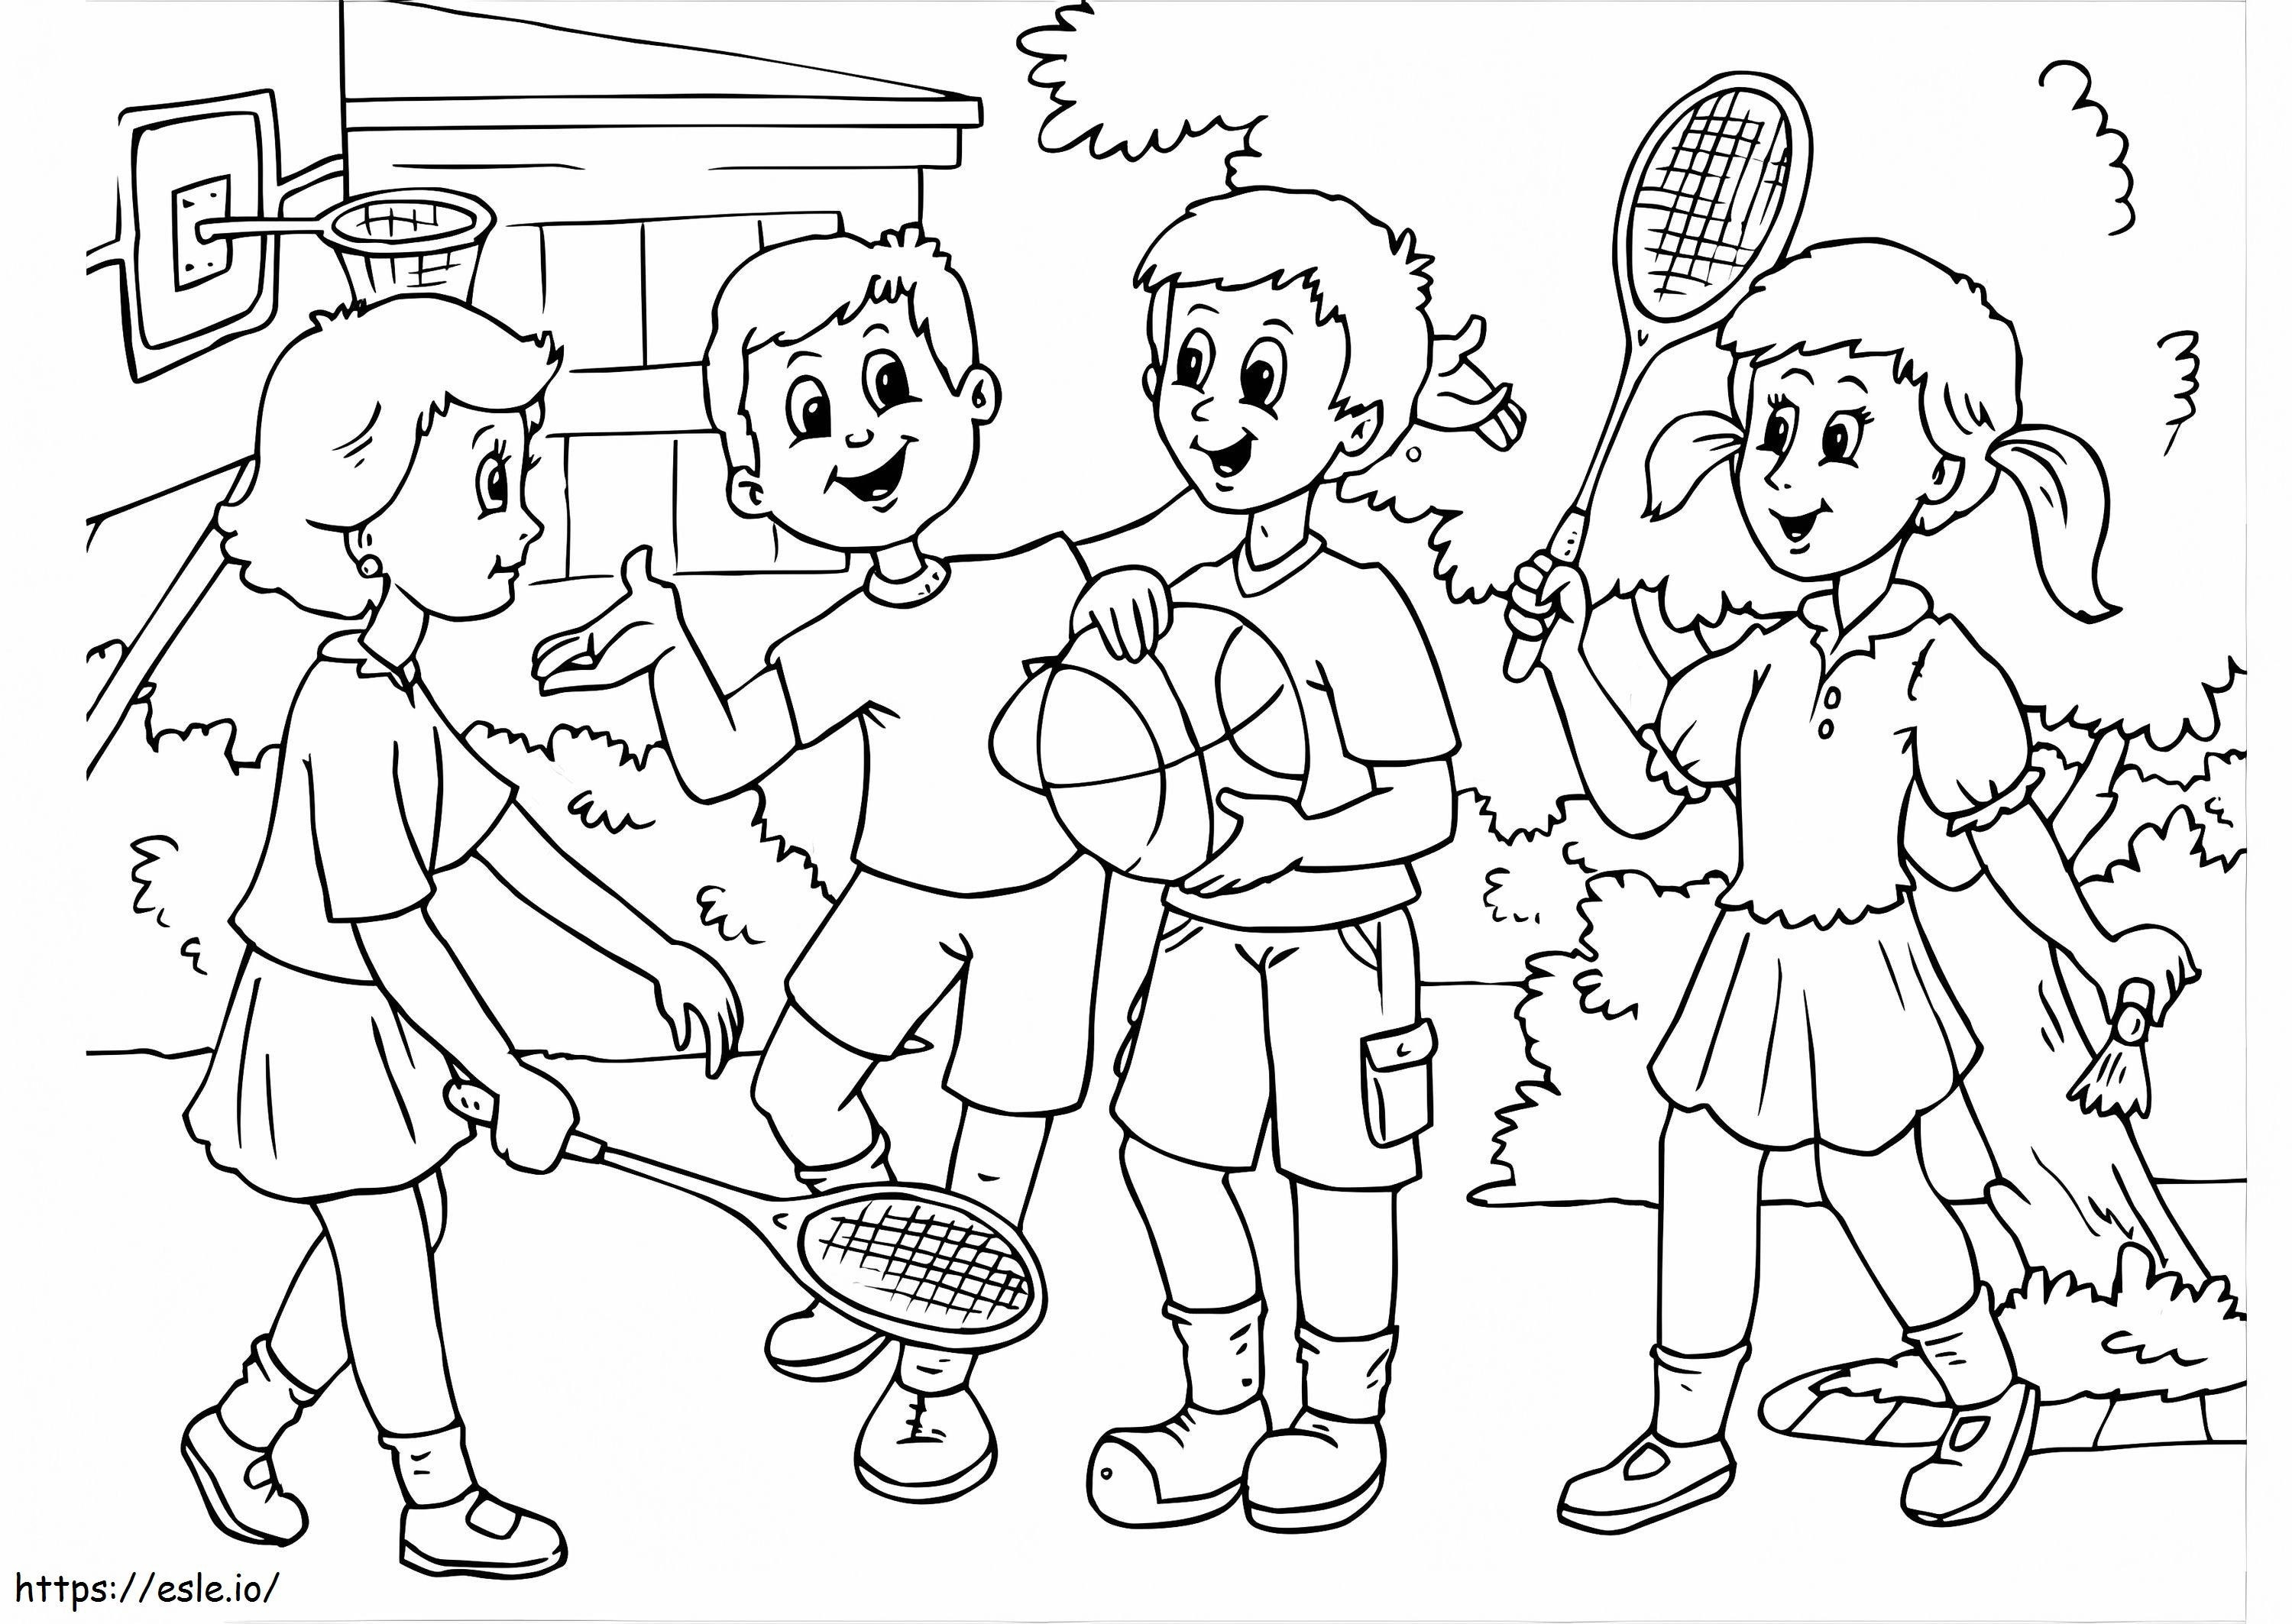 Friendship 7 coloring page